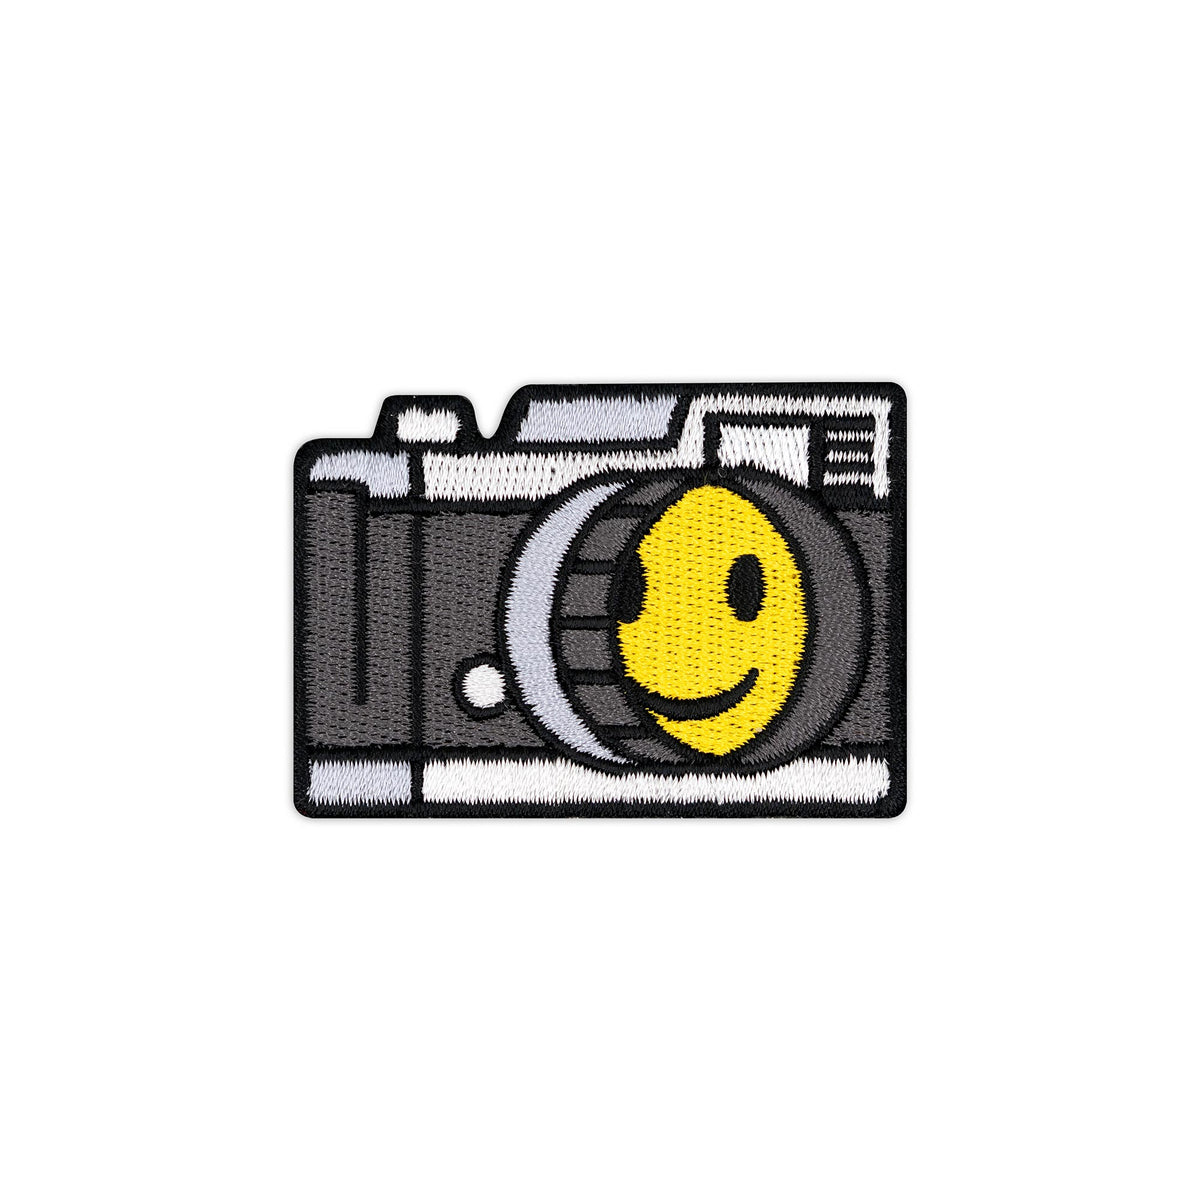 Smiley Face Vintage Camera embroidered iron-on patch